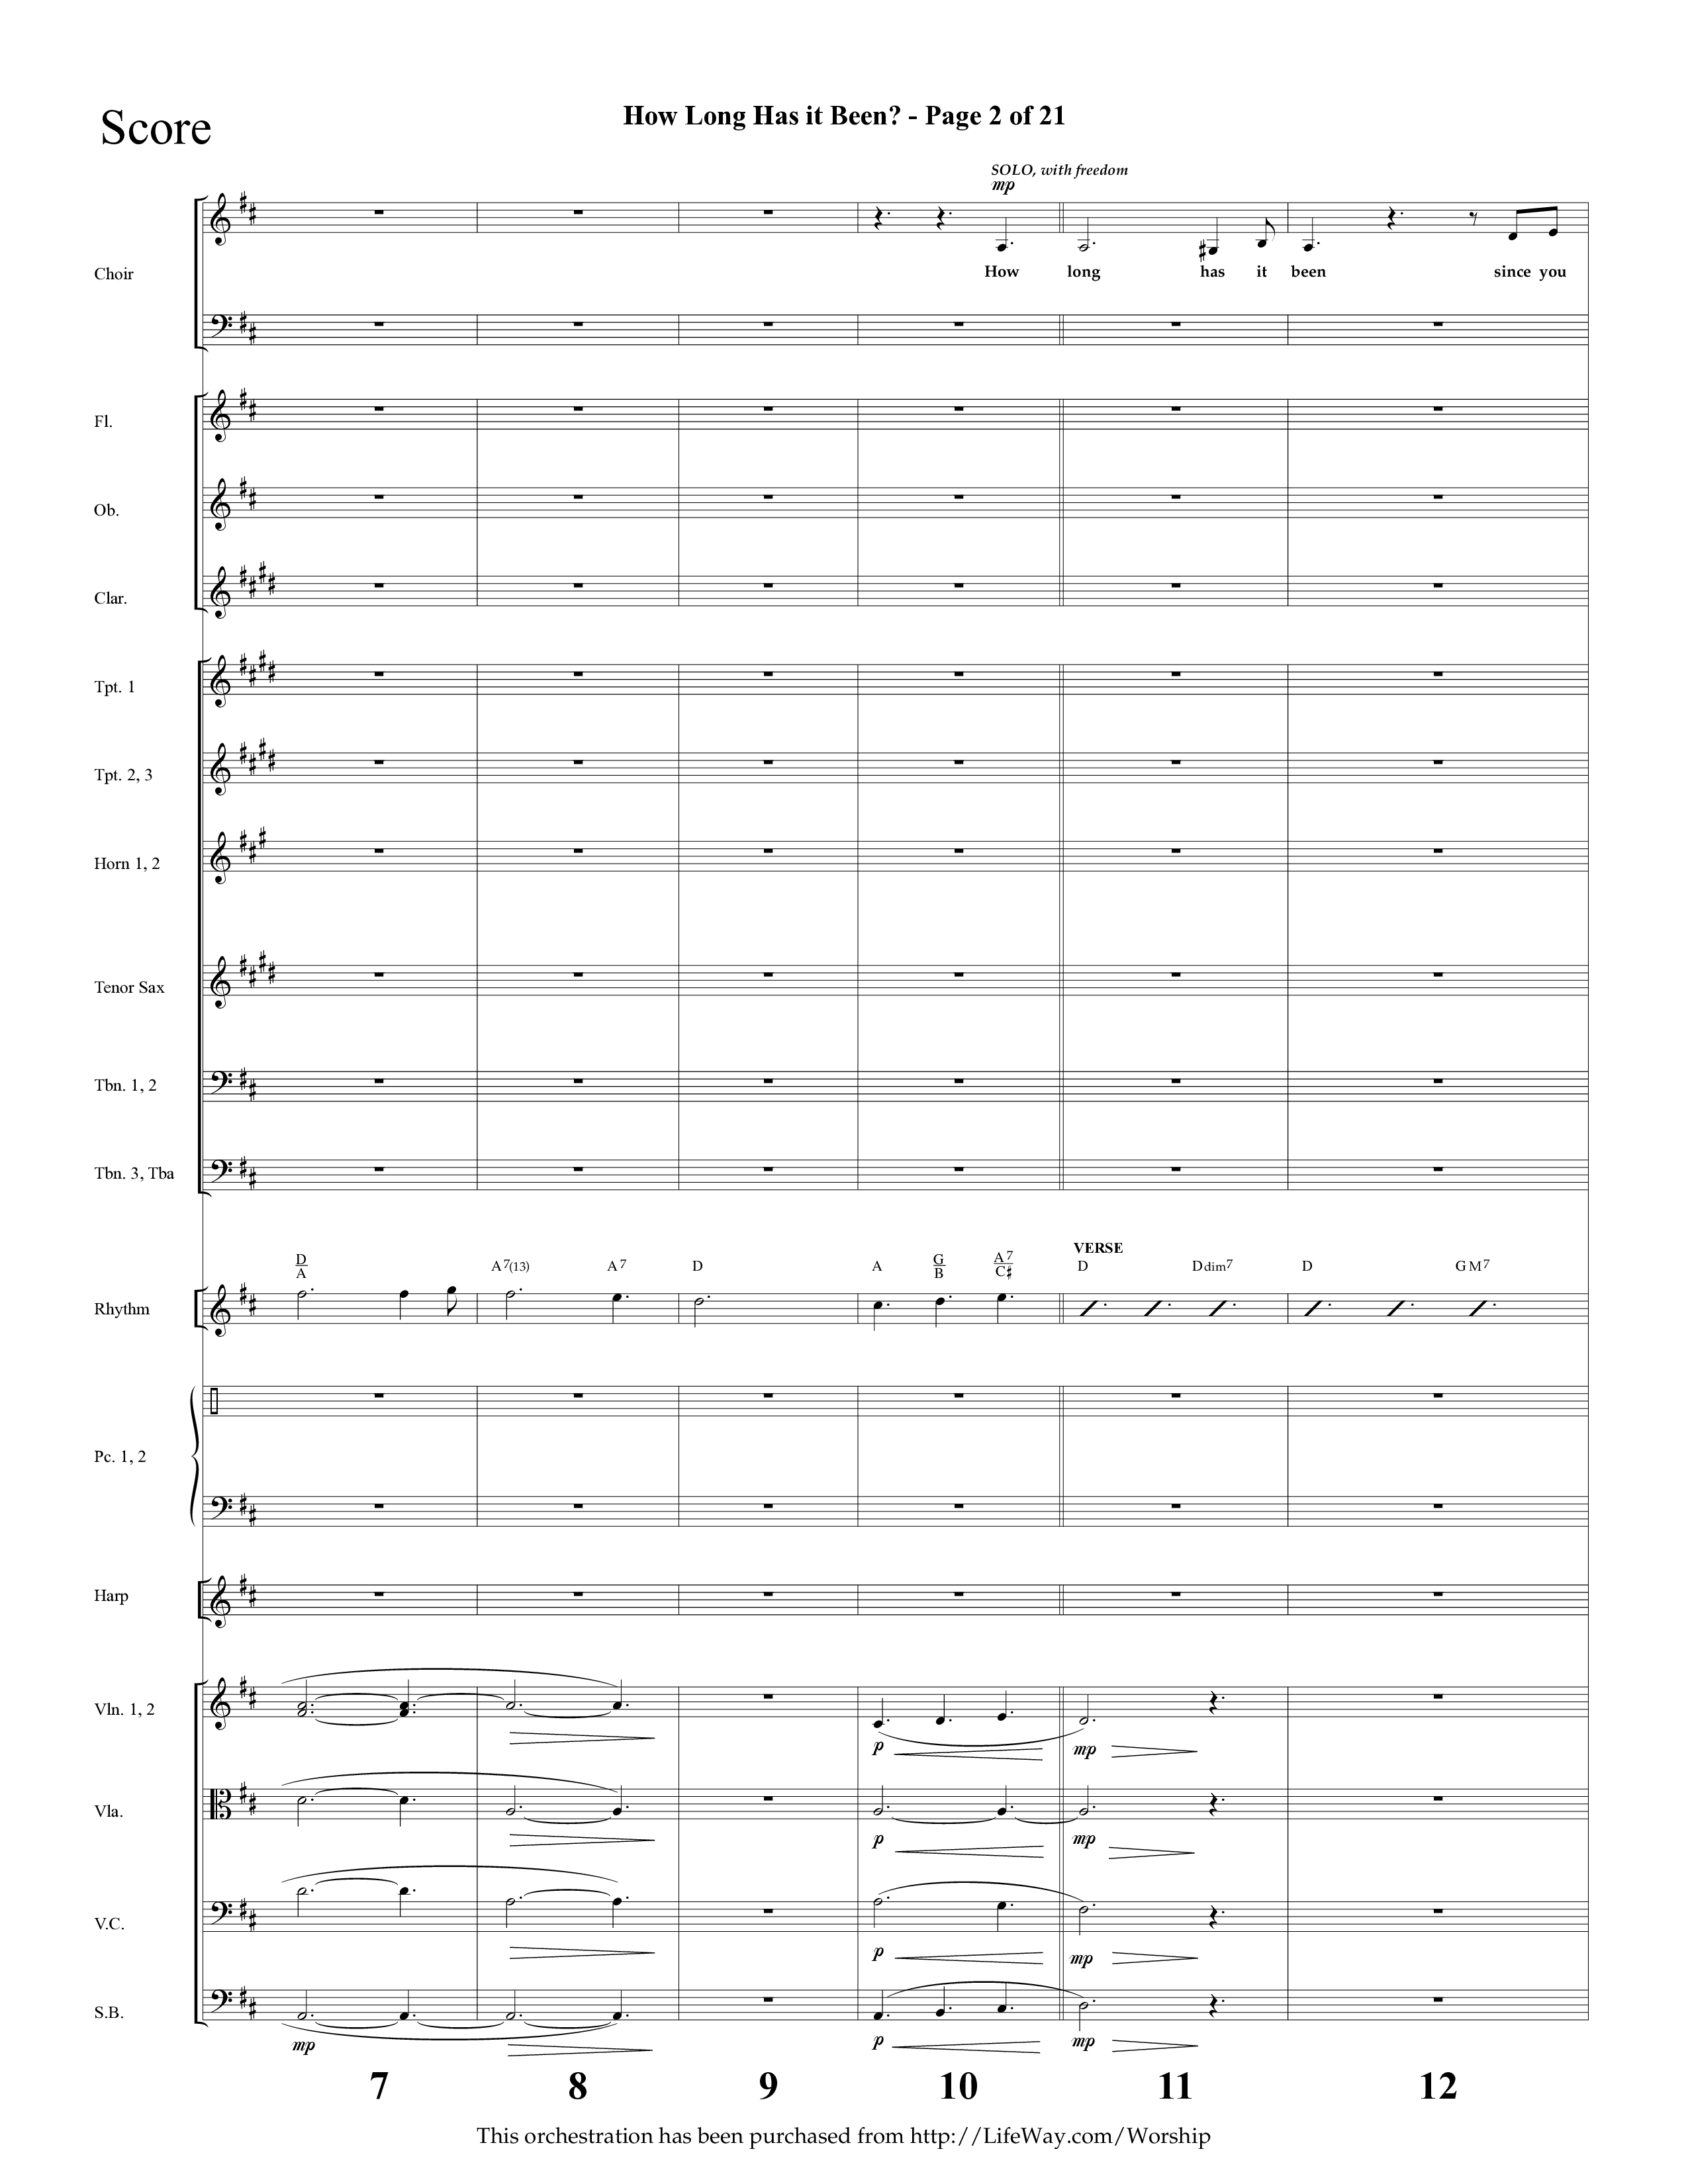 How Long Has It Been (with Pray On) (Choral Anthem SATB) Orchestration (Lifeway Choral / Arr. Cliff Duren)